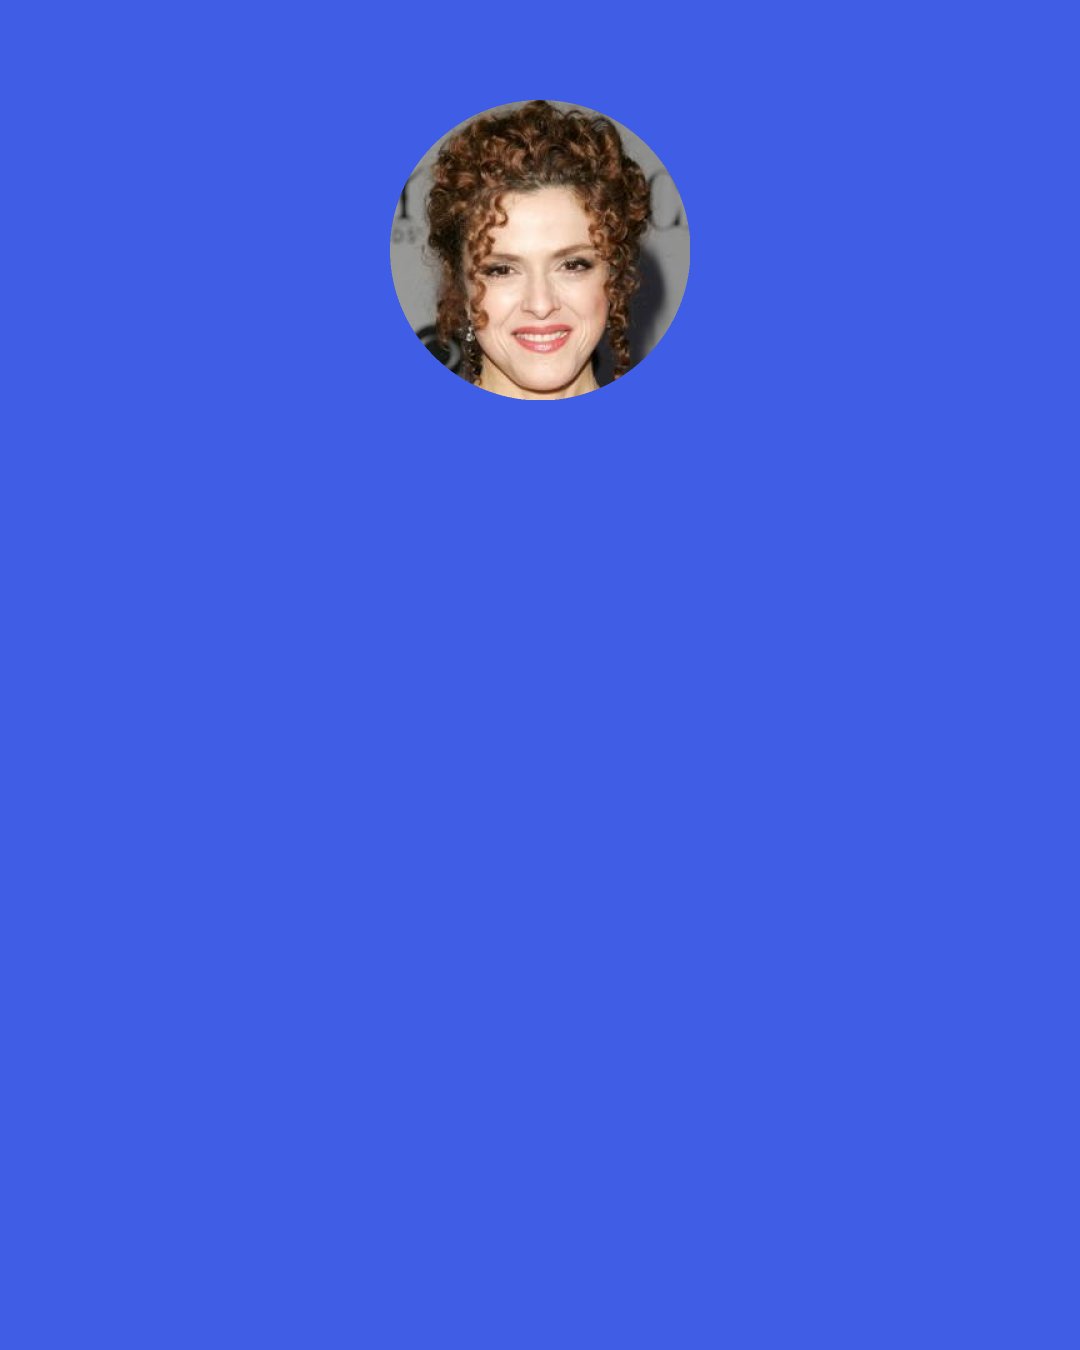 Bernadette Peters: "Into the Woods" was... a lot of running around in the woods! I can't wait to see the show again. People didn't realize it back then, but kids still come up to me-young people-and they talk about it. It really made its mark.